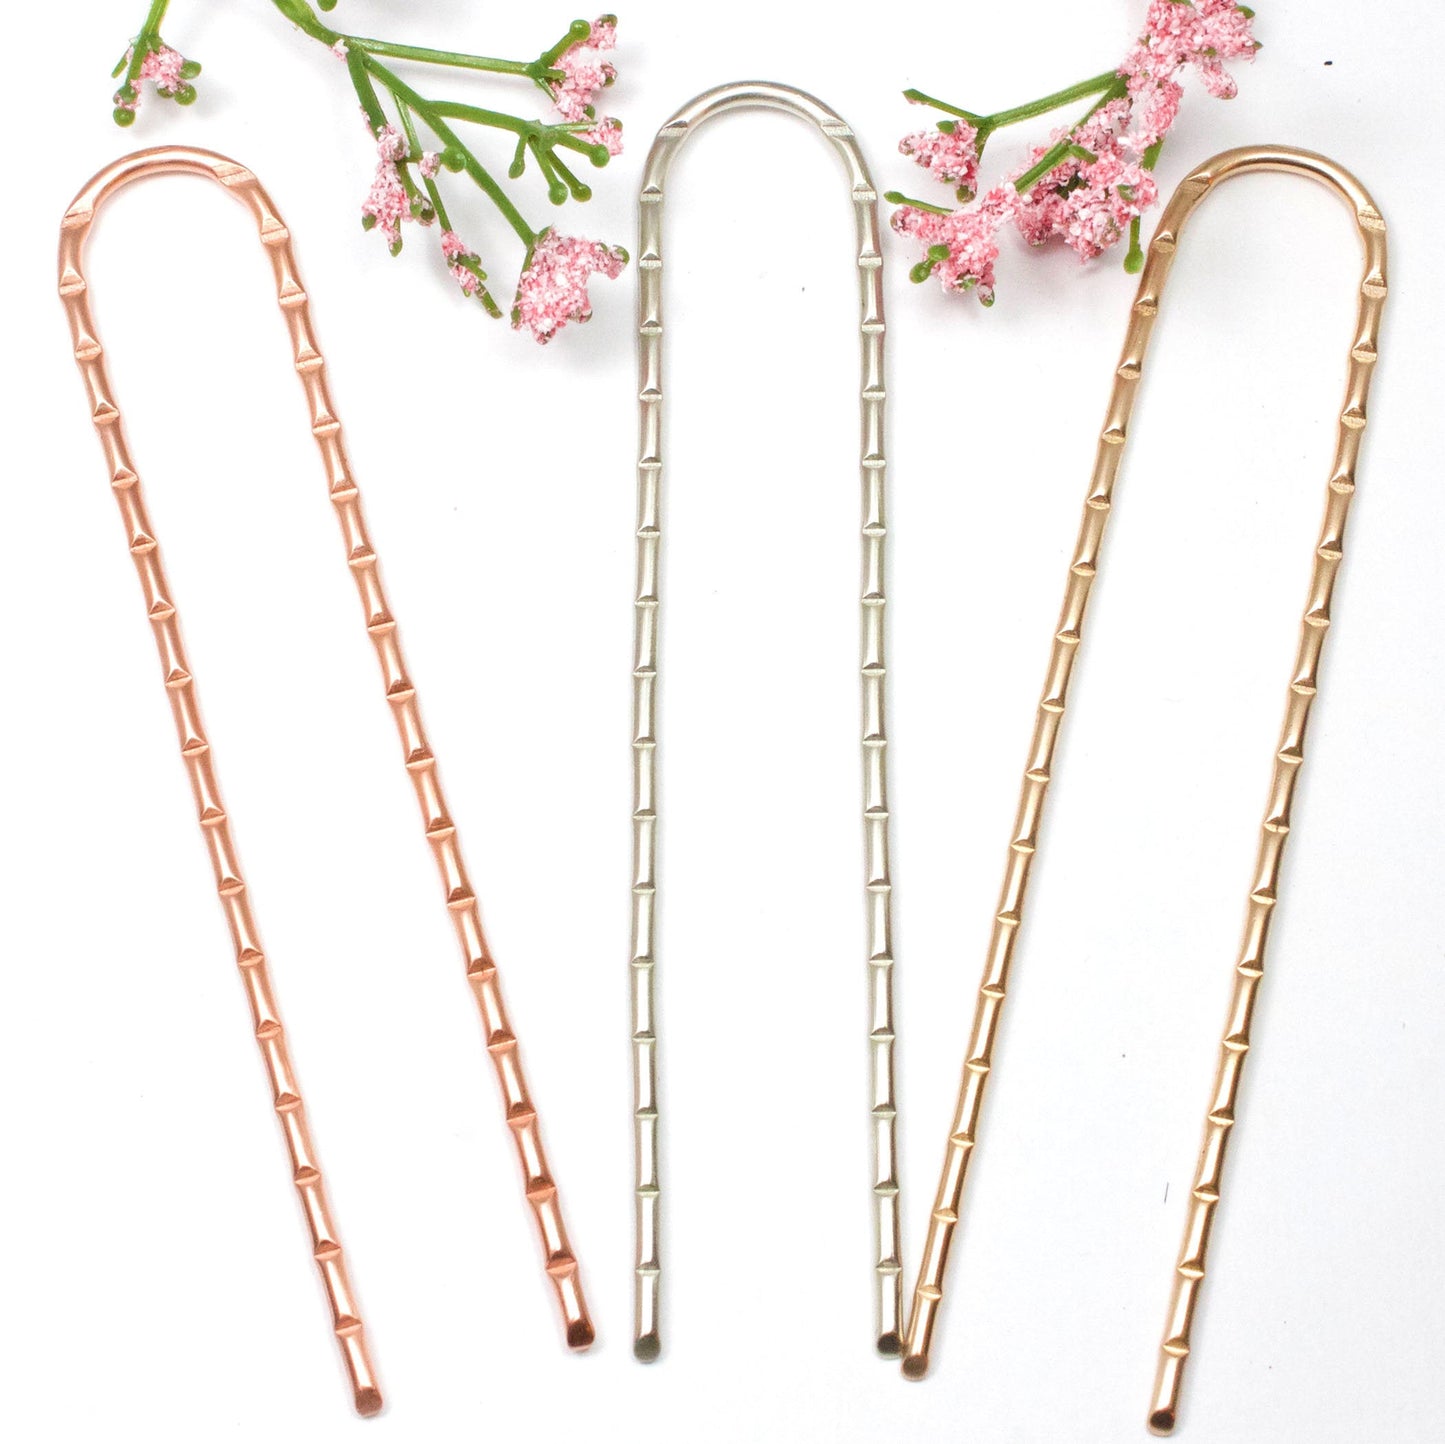 Copper, nickel, and bronze deep lines hair forks showing the actual size of a 5 inch hair fork. Stages with pink flowers.